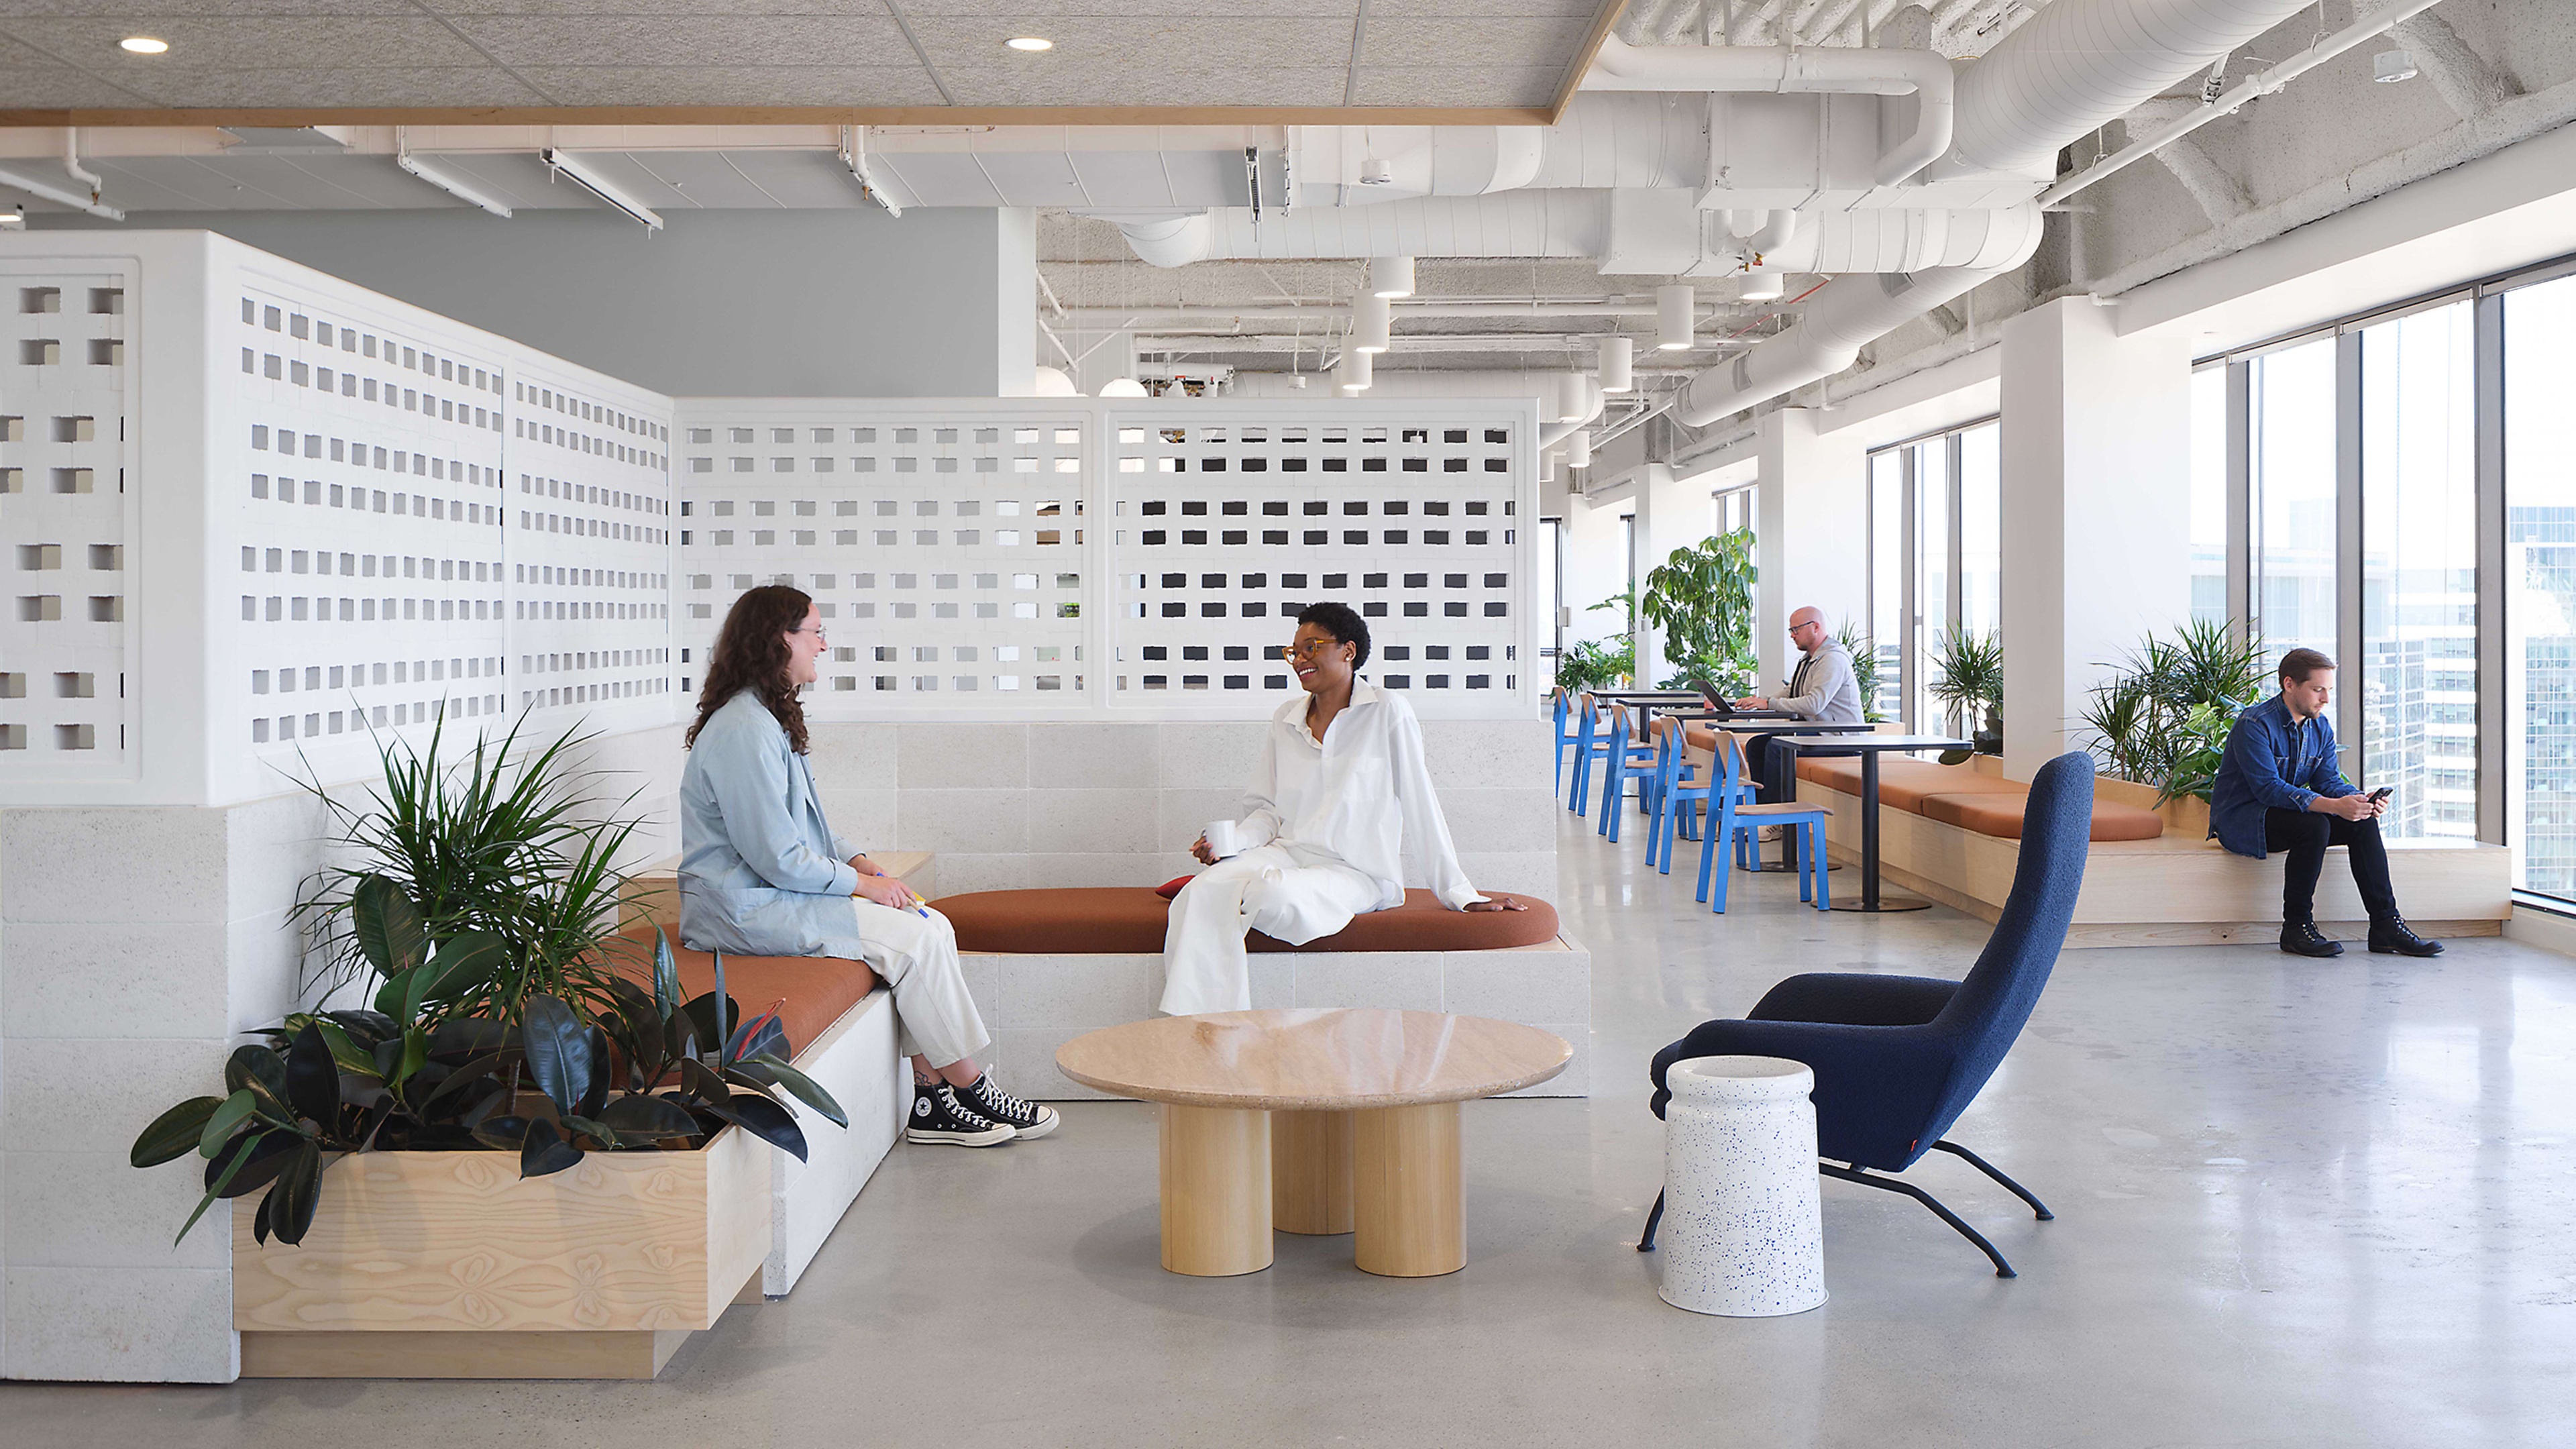 Here’s what it looks like when an office is designed for its remote workers